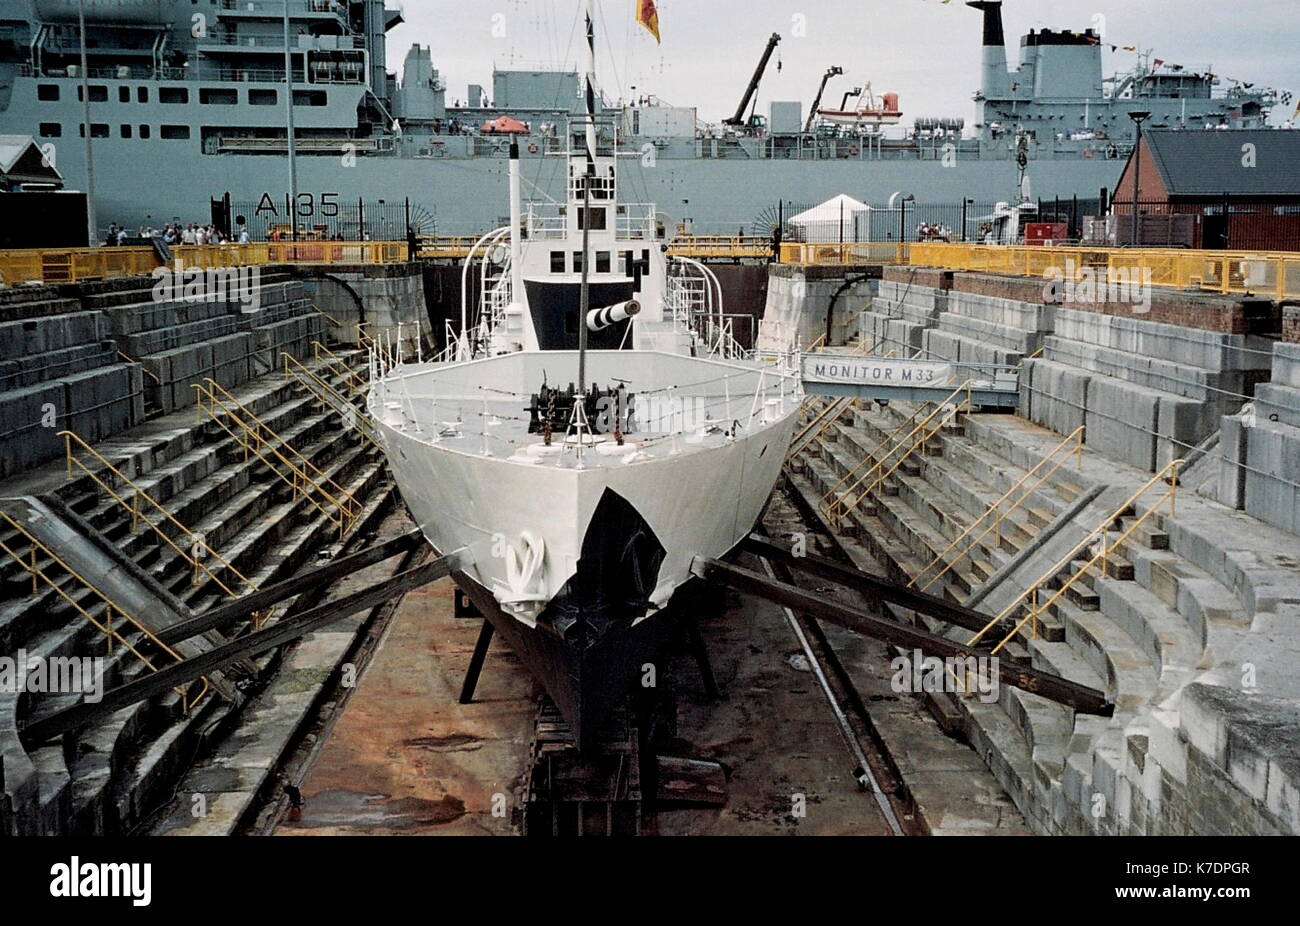 AJAXNETPHOTO. 30TH SEPTEMBER, 2010. PORTSMOUTH, ENGLAND. - HMS M.33 IN SCHEDULED ANCIENT MONUMENT NO.1 DRY DOCK IN THE HISTORIC DOCKYARD. PHOTO:JONATHAN EASTLAND/AJAX REF:APSX3009 04 4 Stock Photo